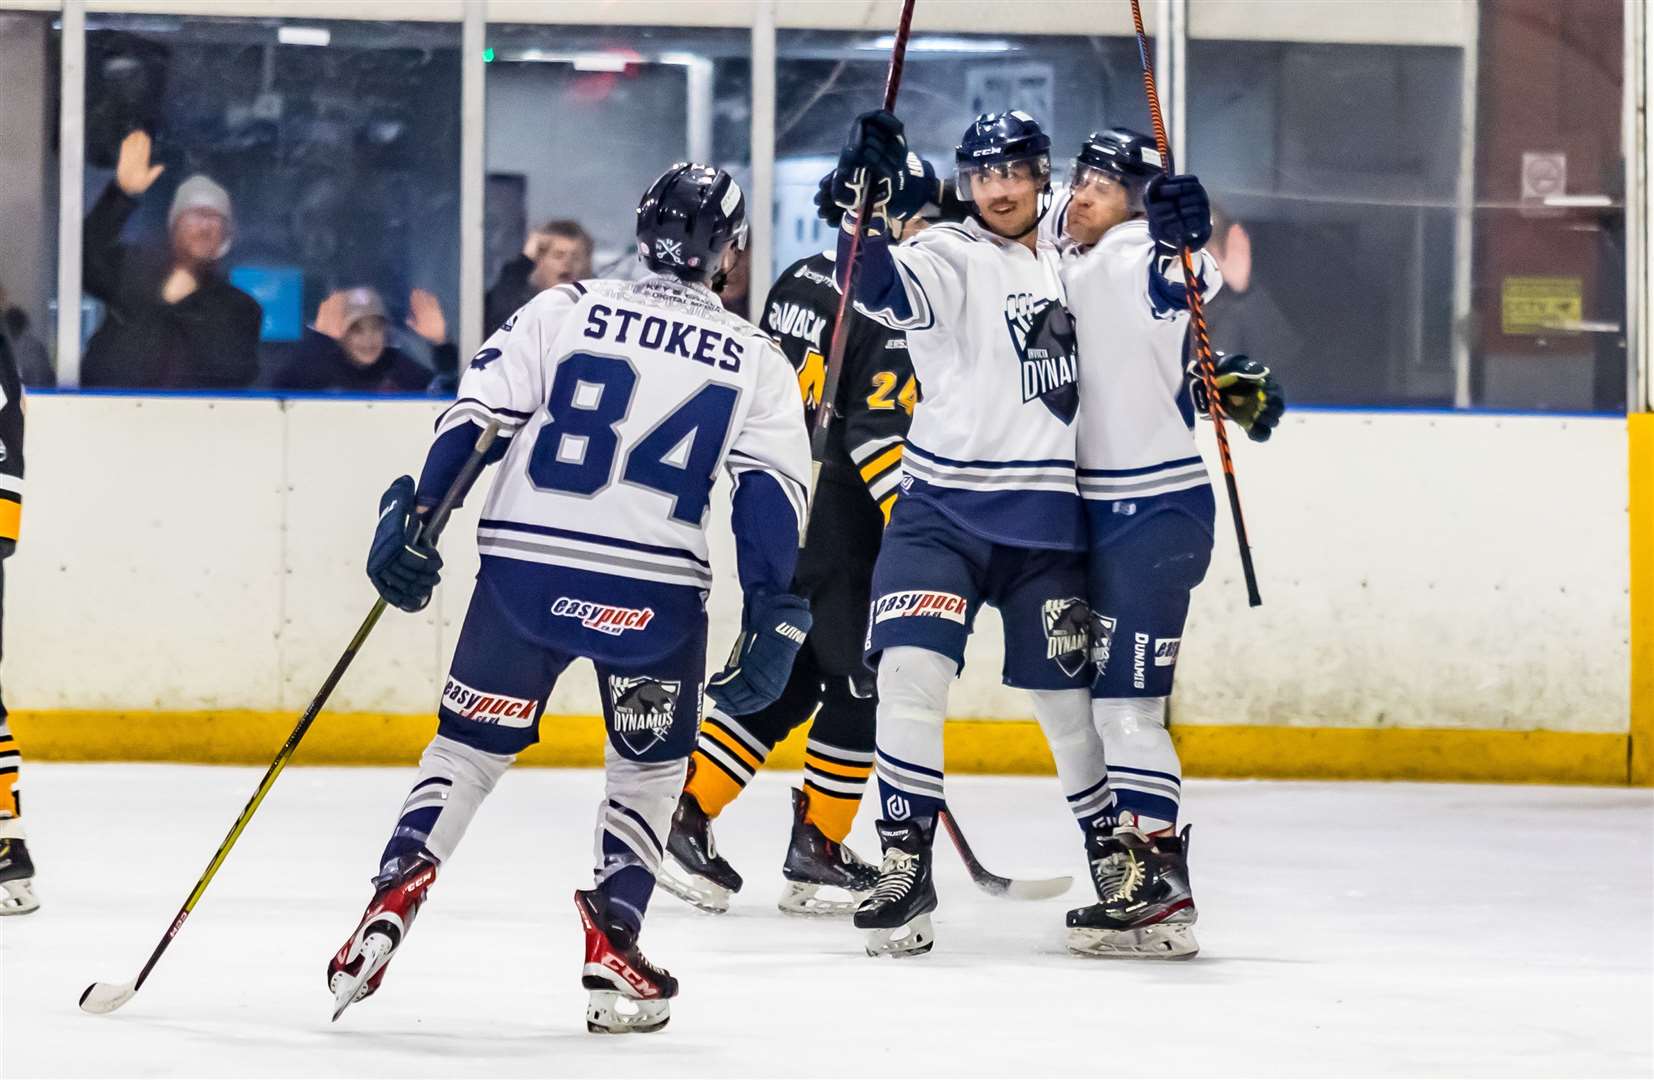 Invicta Dynamos celebrating against Chelmsford Chieftains in the play-off quarter-final Picture: David Trevallion